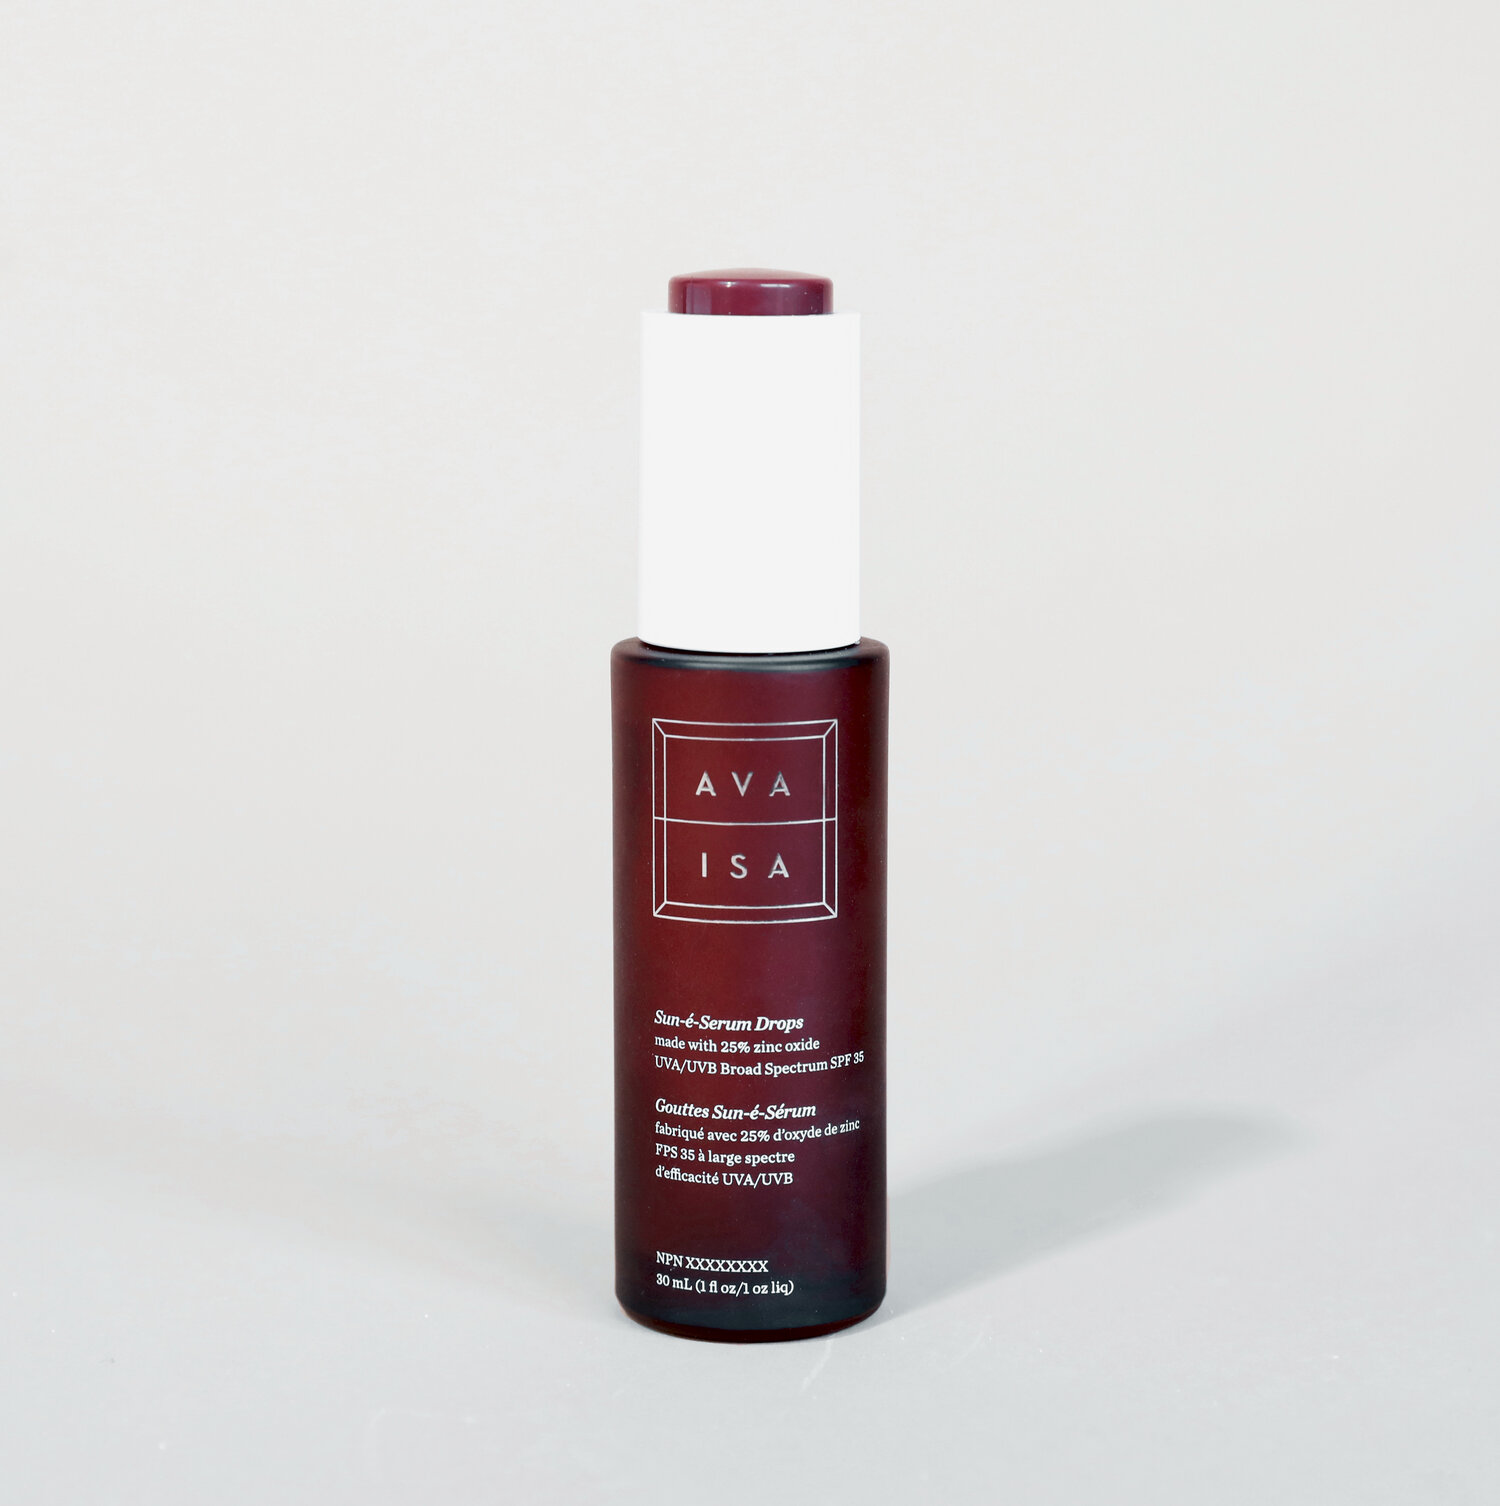 Ava Isa Sun-è-Serum Drops 35 All Mineral Sunscreen with 25% Oxide — The Sunscreen Company